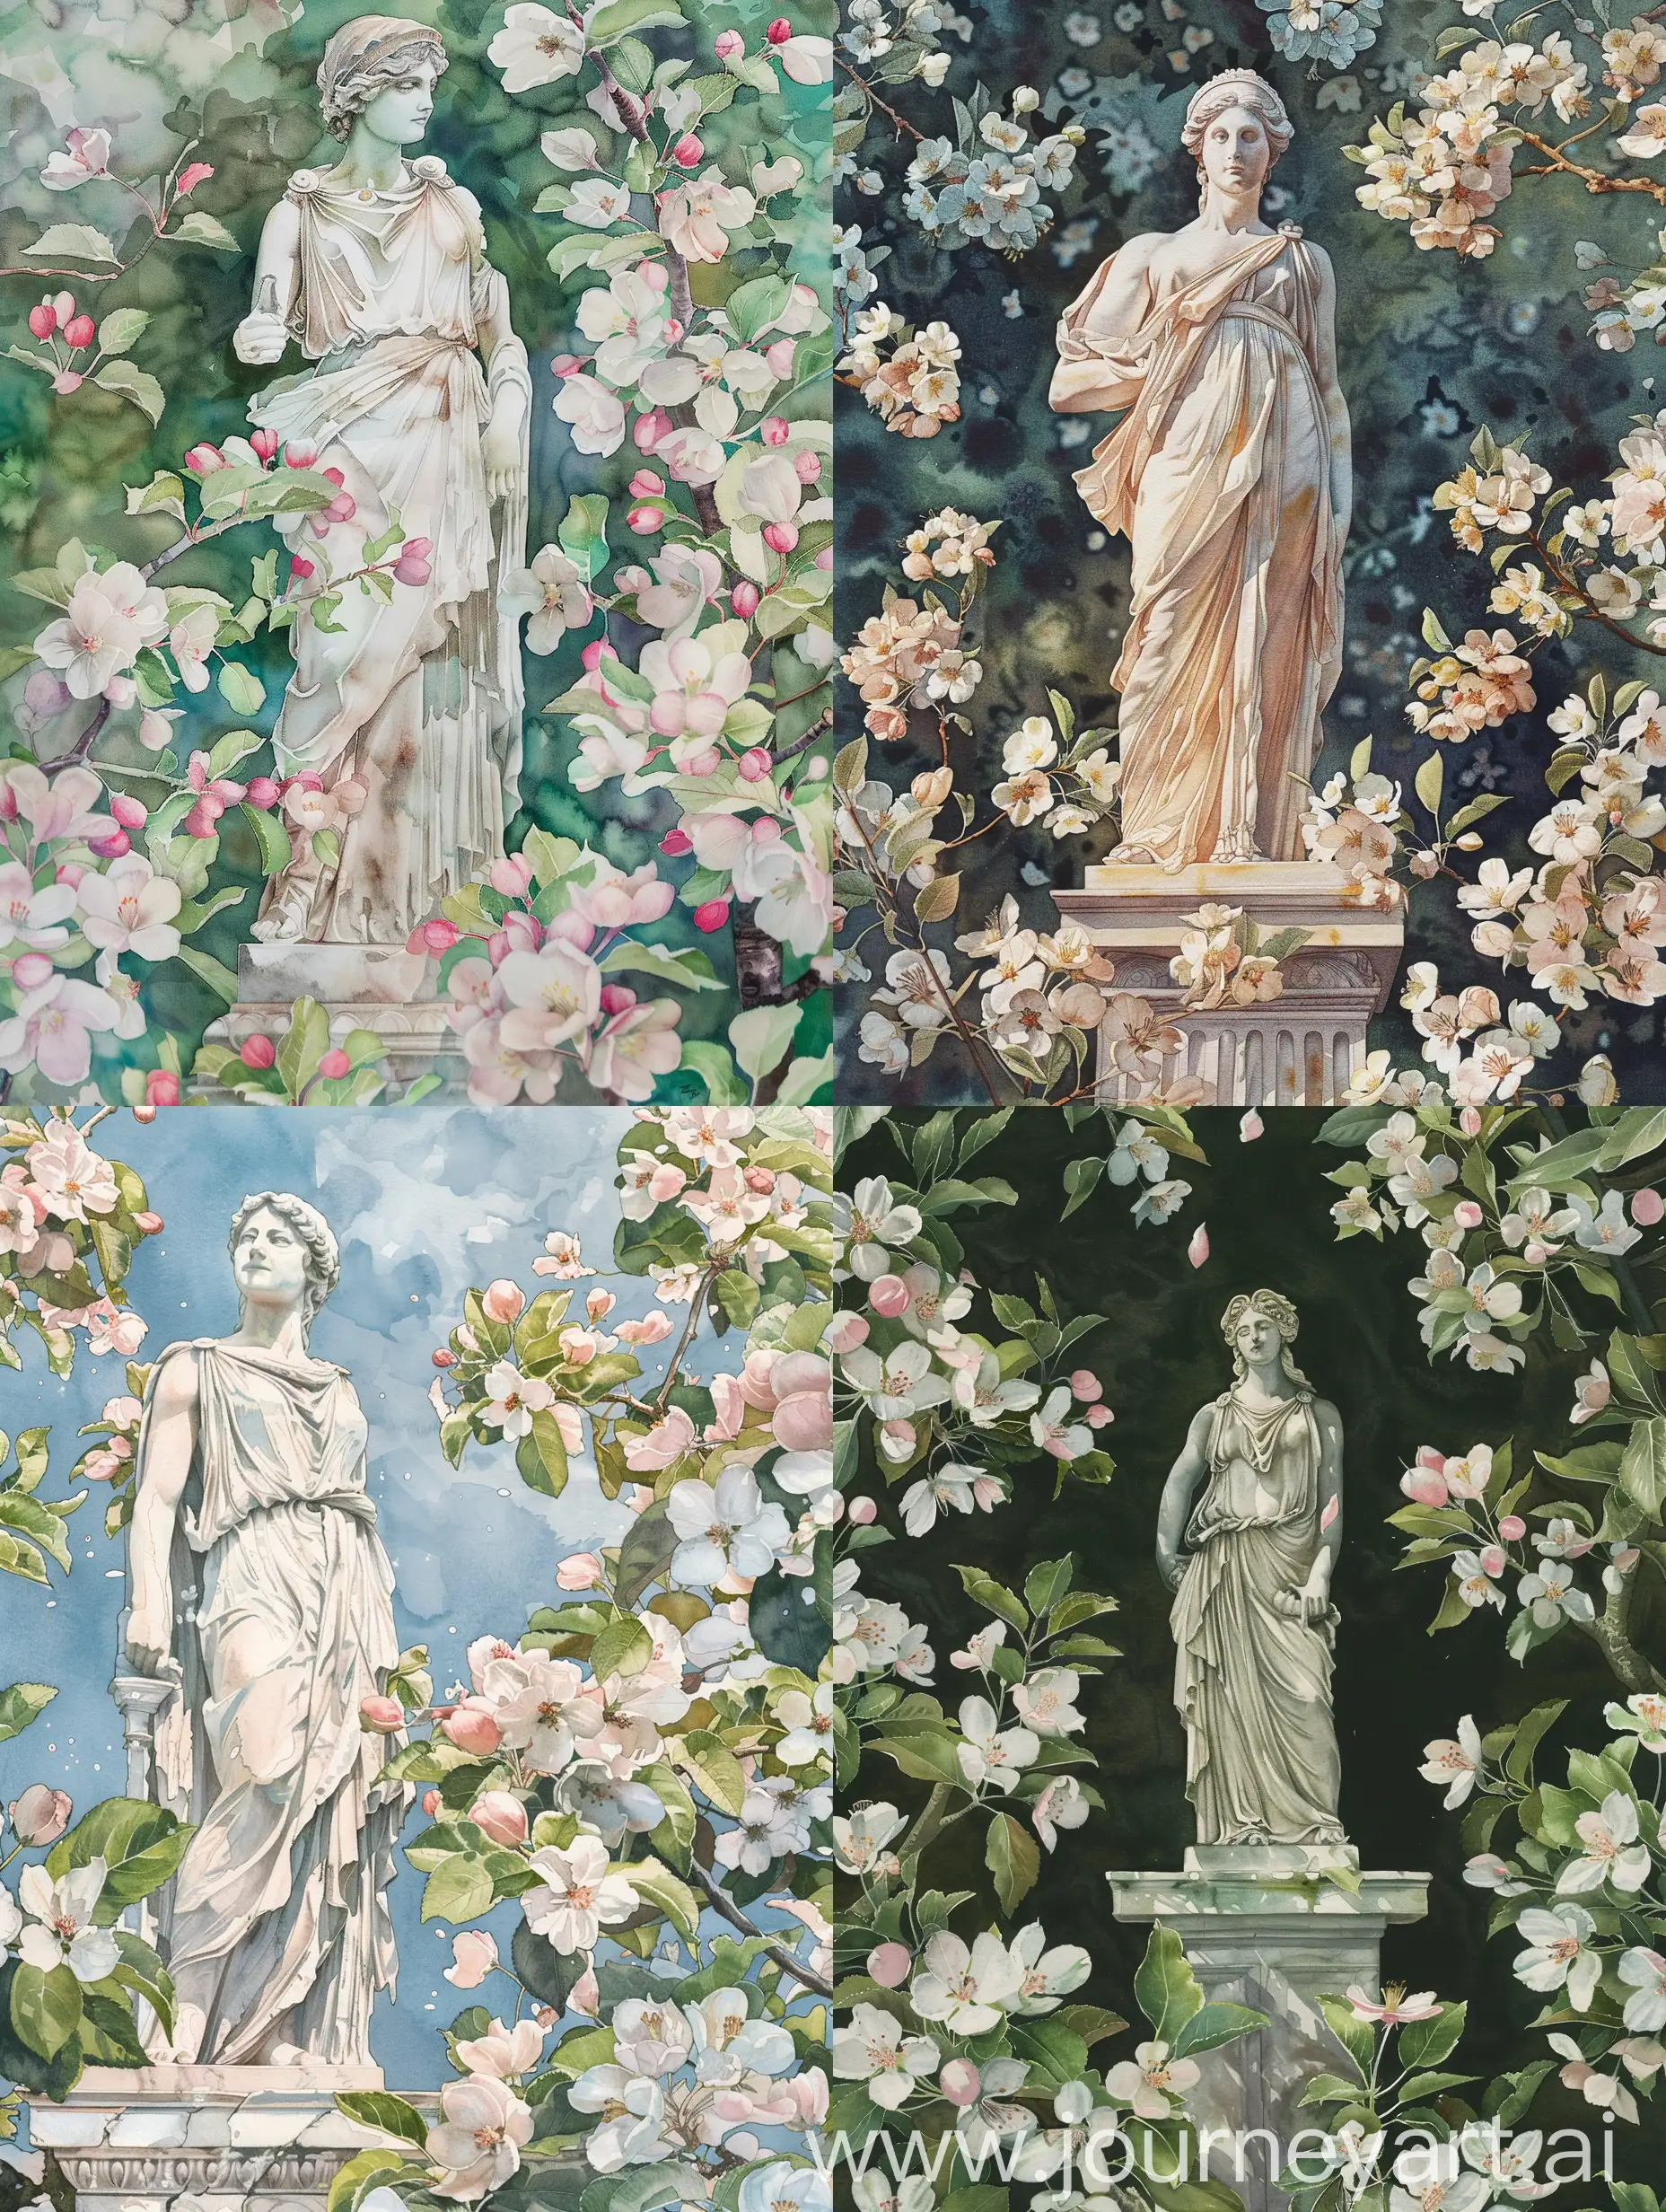 Antique Themis stands tall surrounded by apple blossoms, watercolor style, Victor Ngai